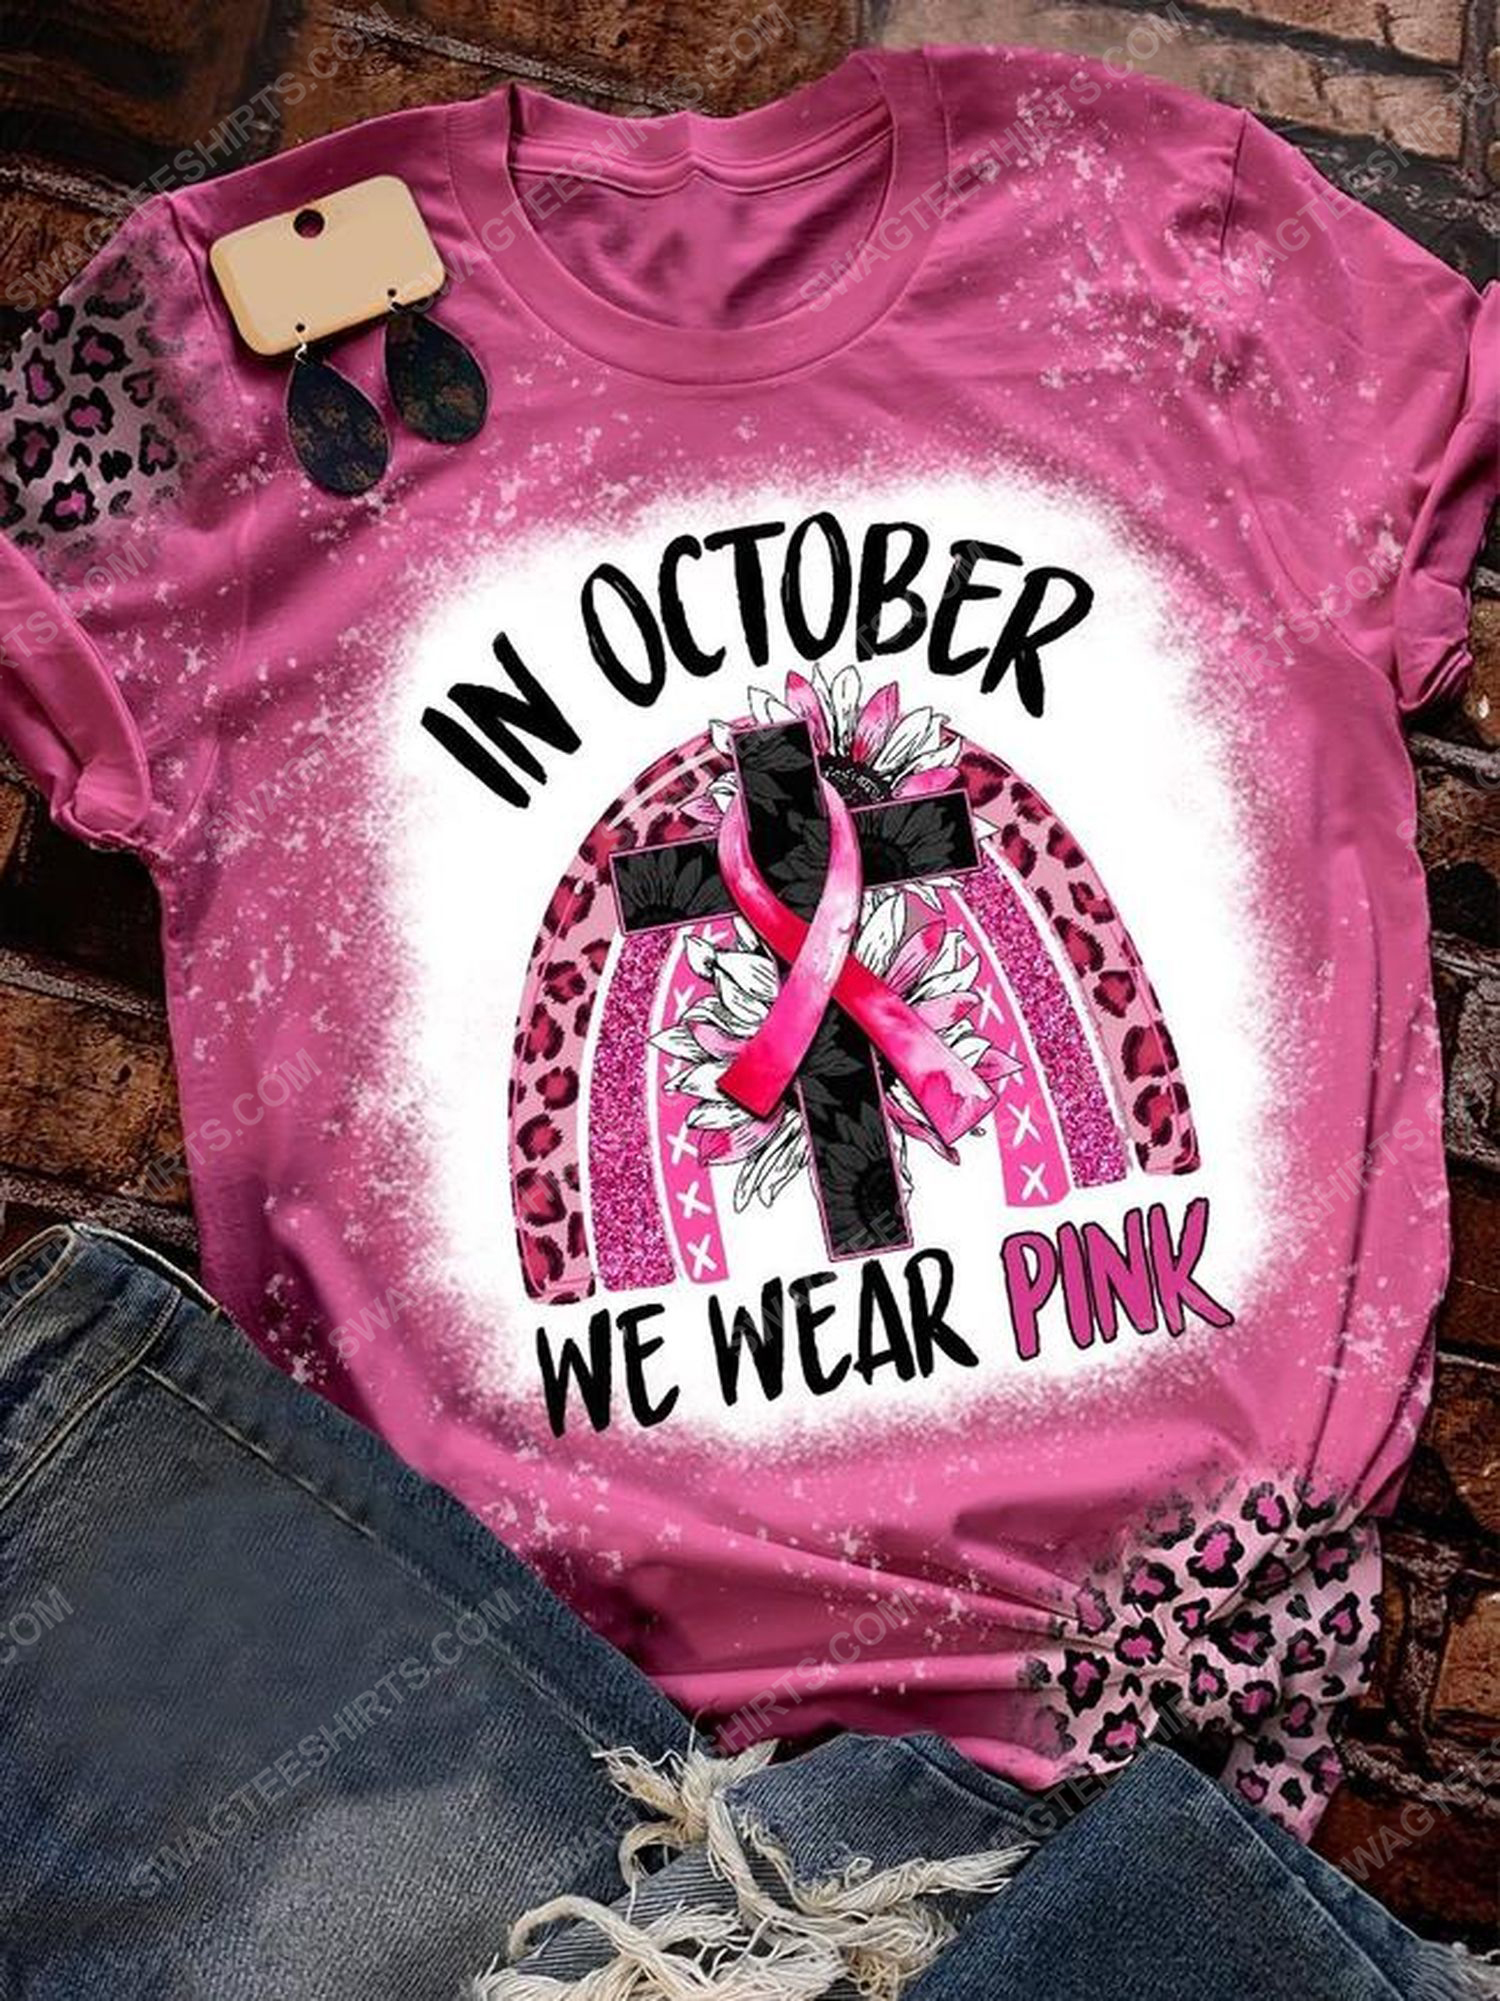 Breast cancer awareness in october we wear pink leopard shirt 1 - Copy (3)